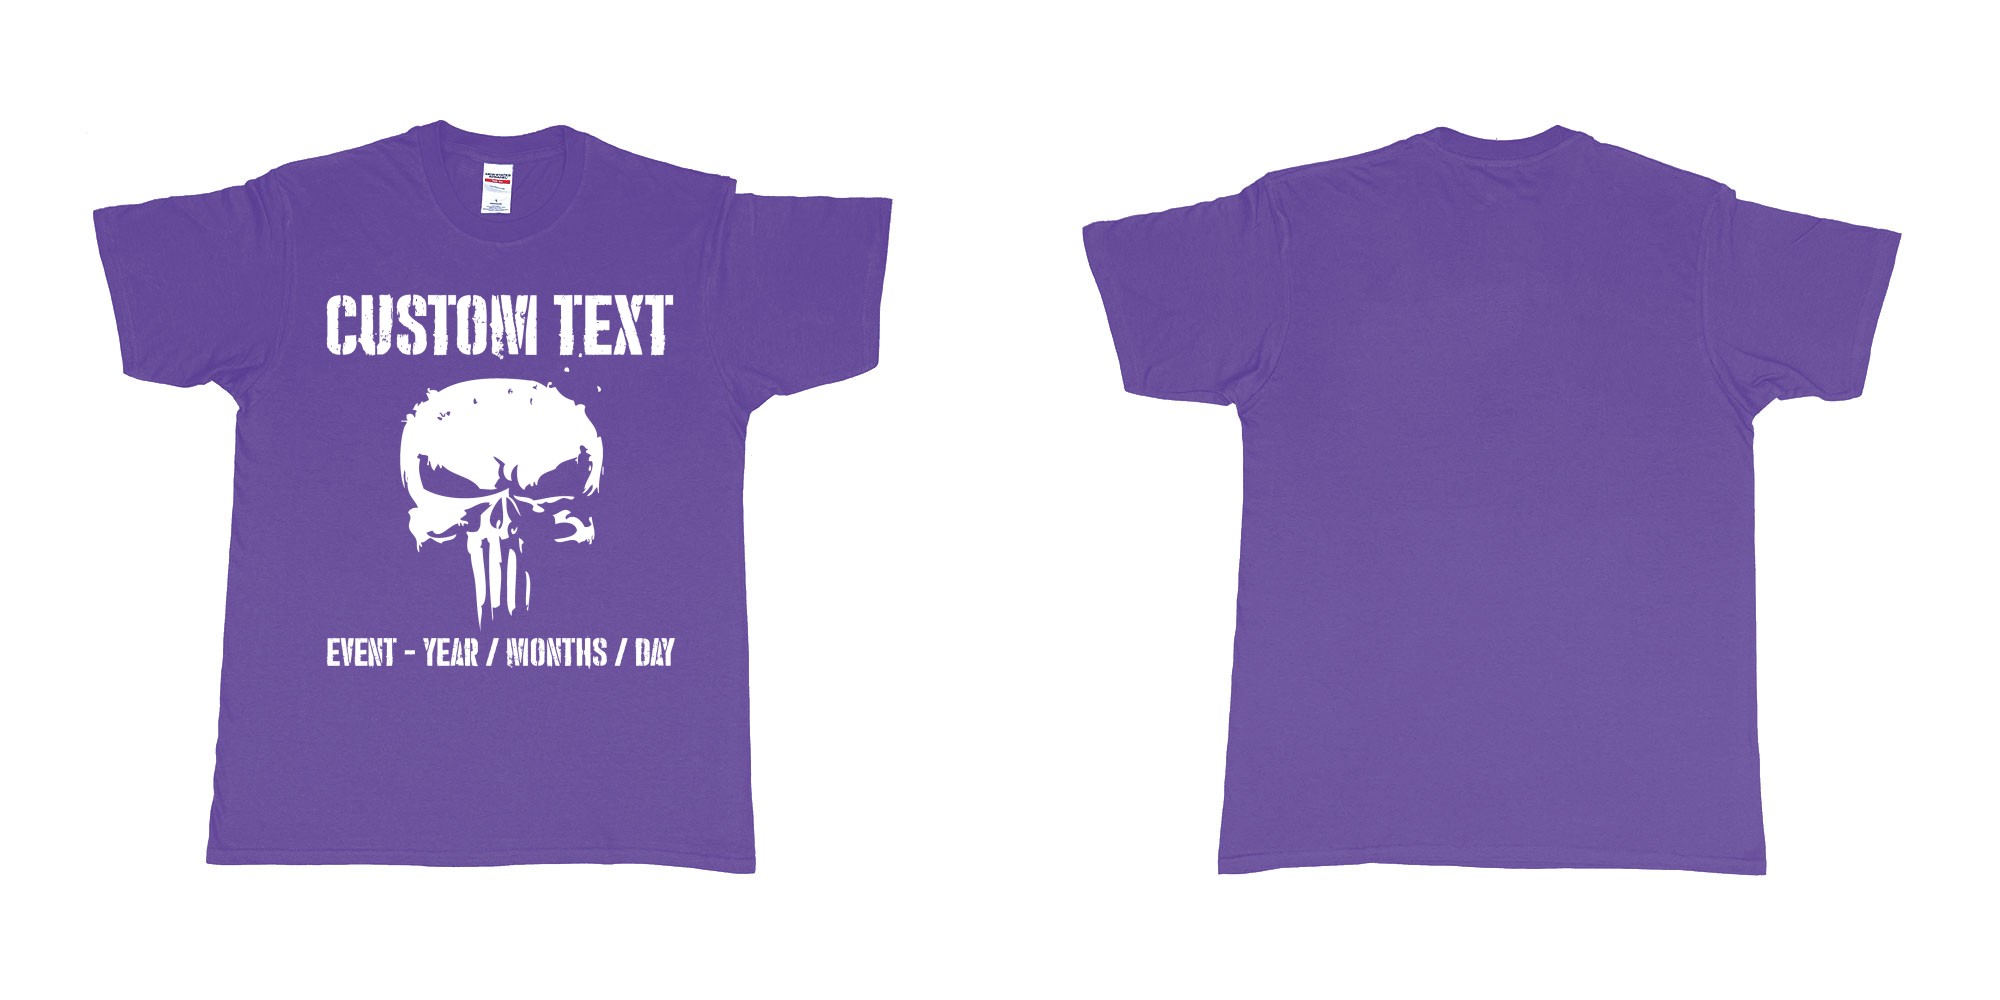 Custom tshirt design the punisher scull logo custom text in fabric color purple choice your own text made in Bali by The Pirate Way